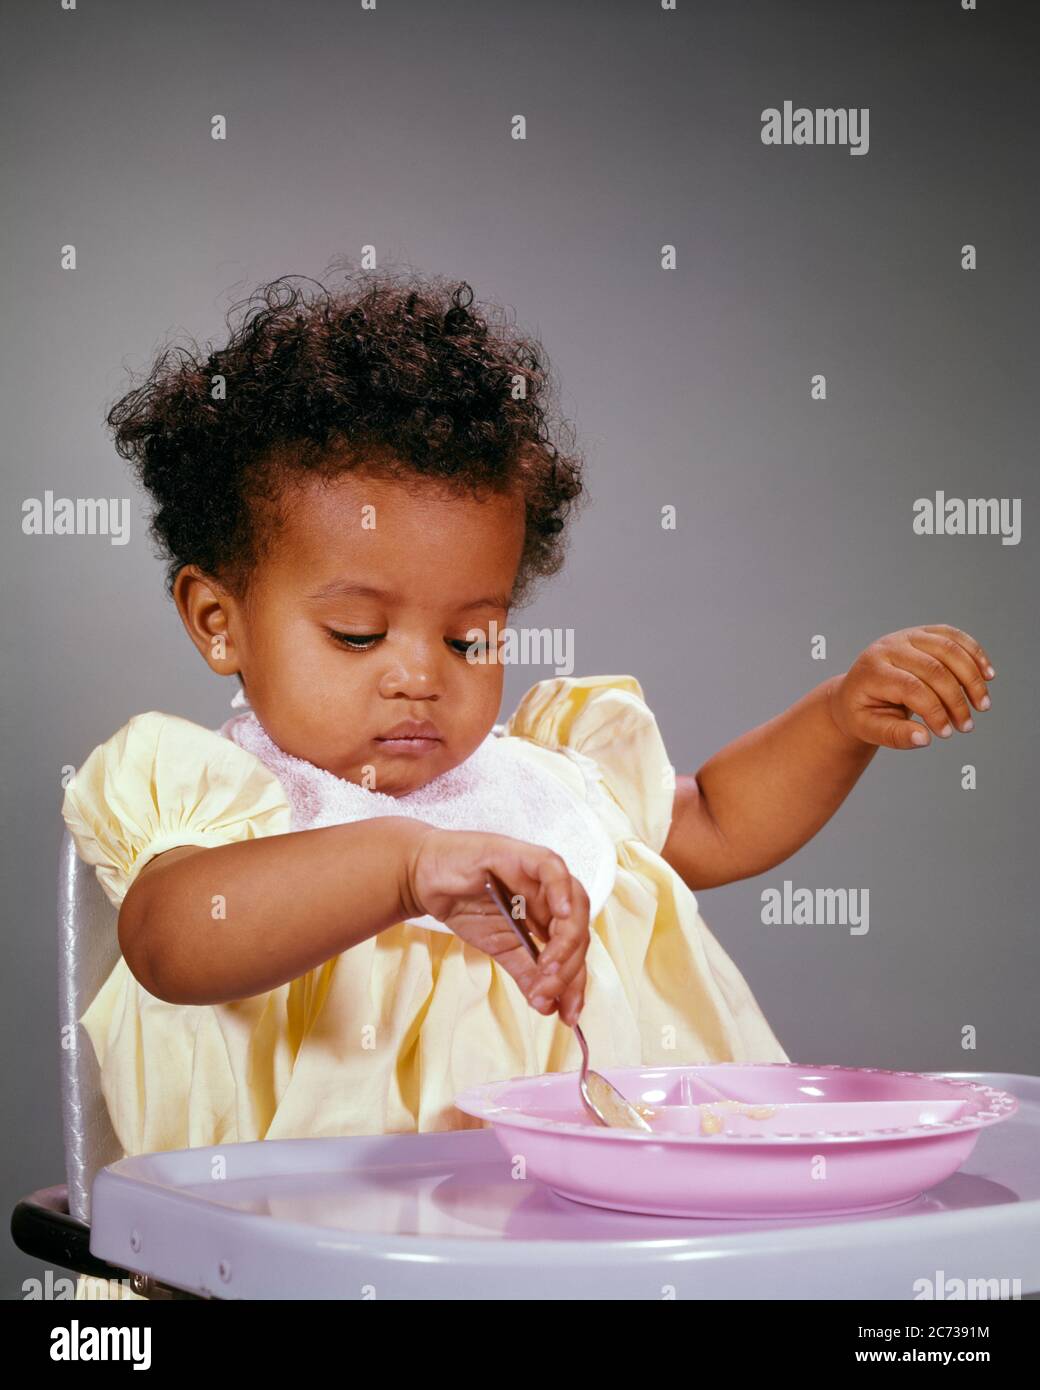 1960s INTENT AFRICAN-AMERICAN BABY GIRL SITTING IN HIGH CHAIR LEARNING TO FEED HERSELF PLAYING WITH HER FOOD WITH A SPOON  - kn398 HAR001 HARS COPY SPACE HALF-LENGTH INSPIRATION FEED CONFIDENCE SUCCESS DISCOVERY AFRICAN-AMERICANS AFRICAN-AMERICAN PROGRESS BLACK ETHNICITY A IN OPPORTUNITY TO CONNECTION CONCEPTUAL STYLISH MOTIVATED FOCUSED GROWTH HERSELF JUVENILES BABY GIRL HAR001 INTENT OLD FASHIONED AFRICAN AMERICANS Stock Photo